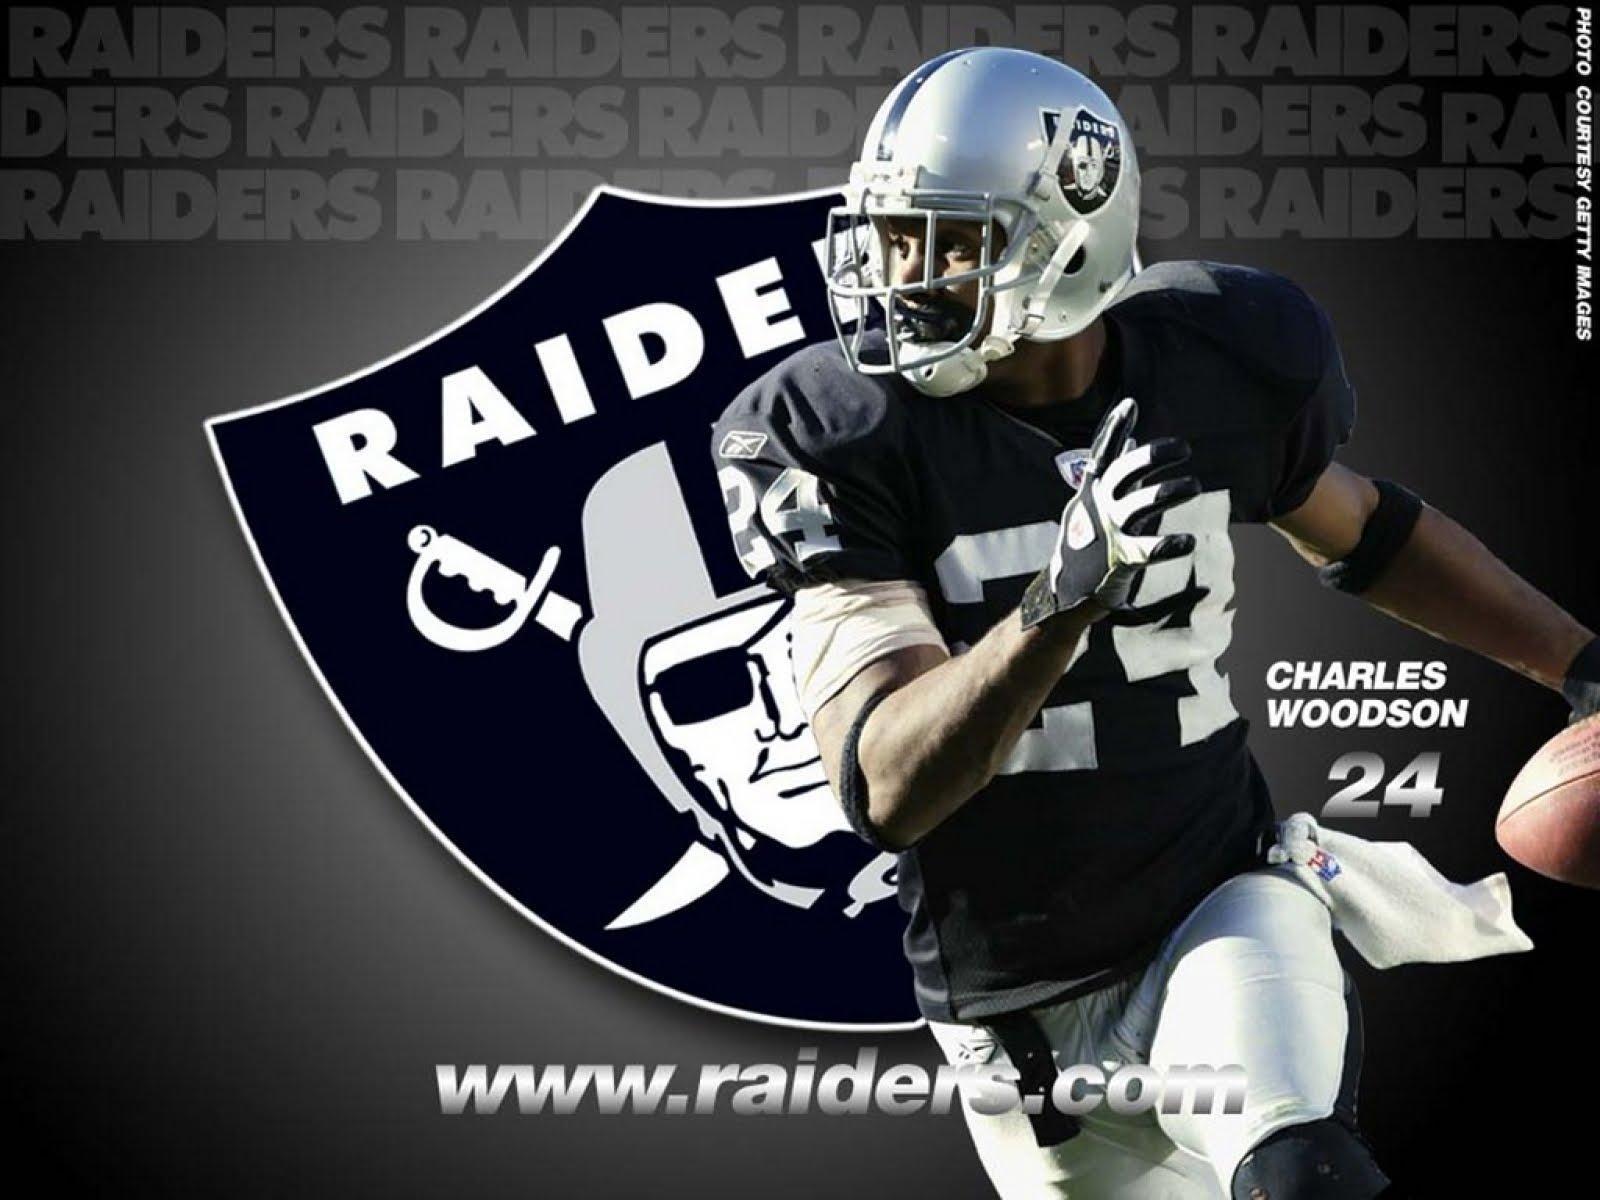 Raiders Charles Woodson announces his retirement from NFL after